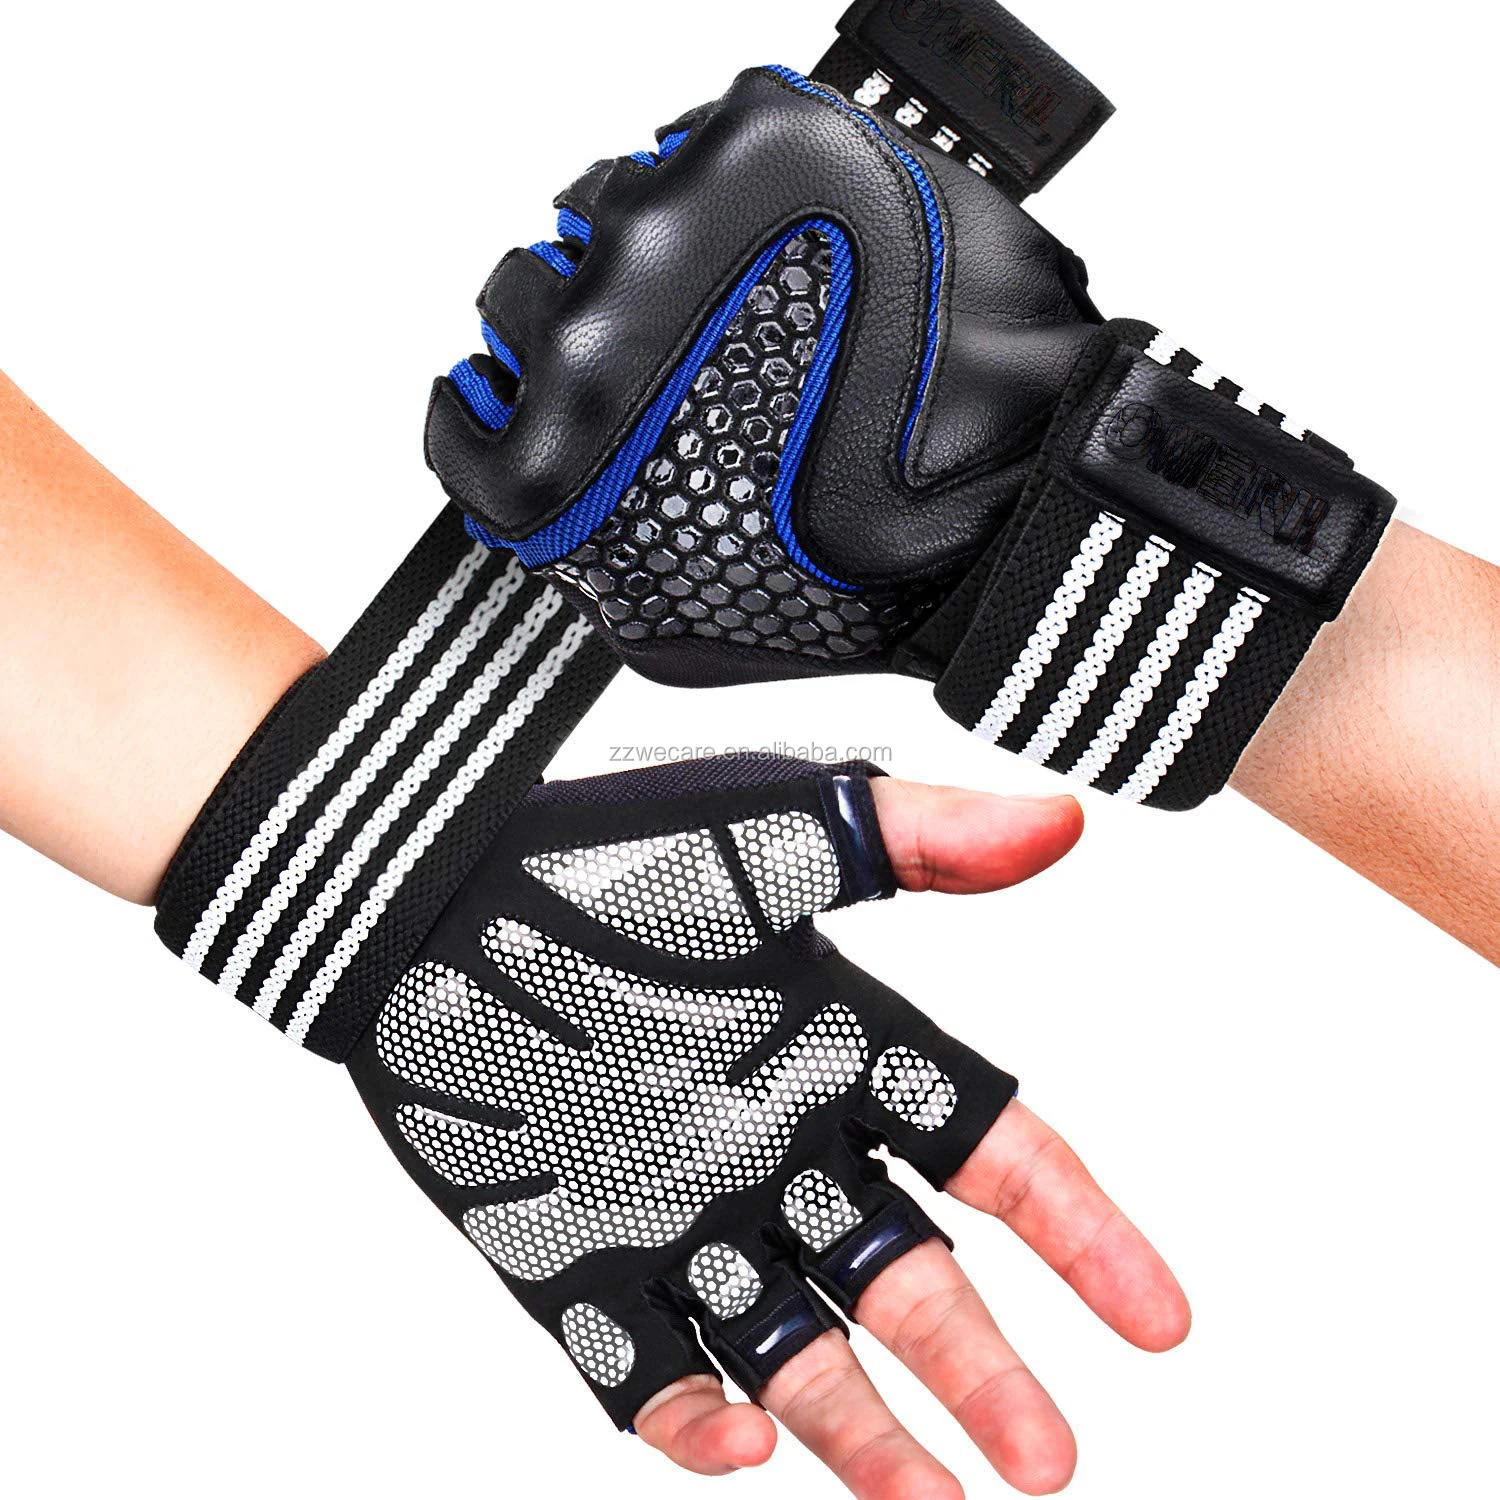 Gym Gloves,Weight Lifting Gloves with Full Wrist Support,Extra Grip Training 